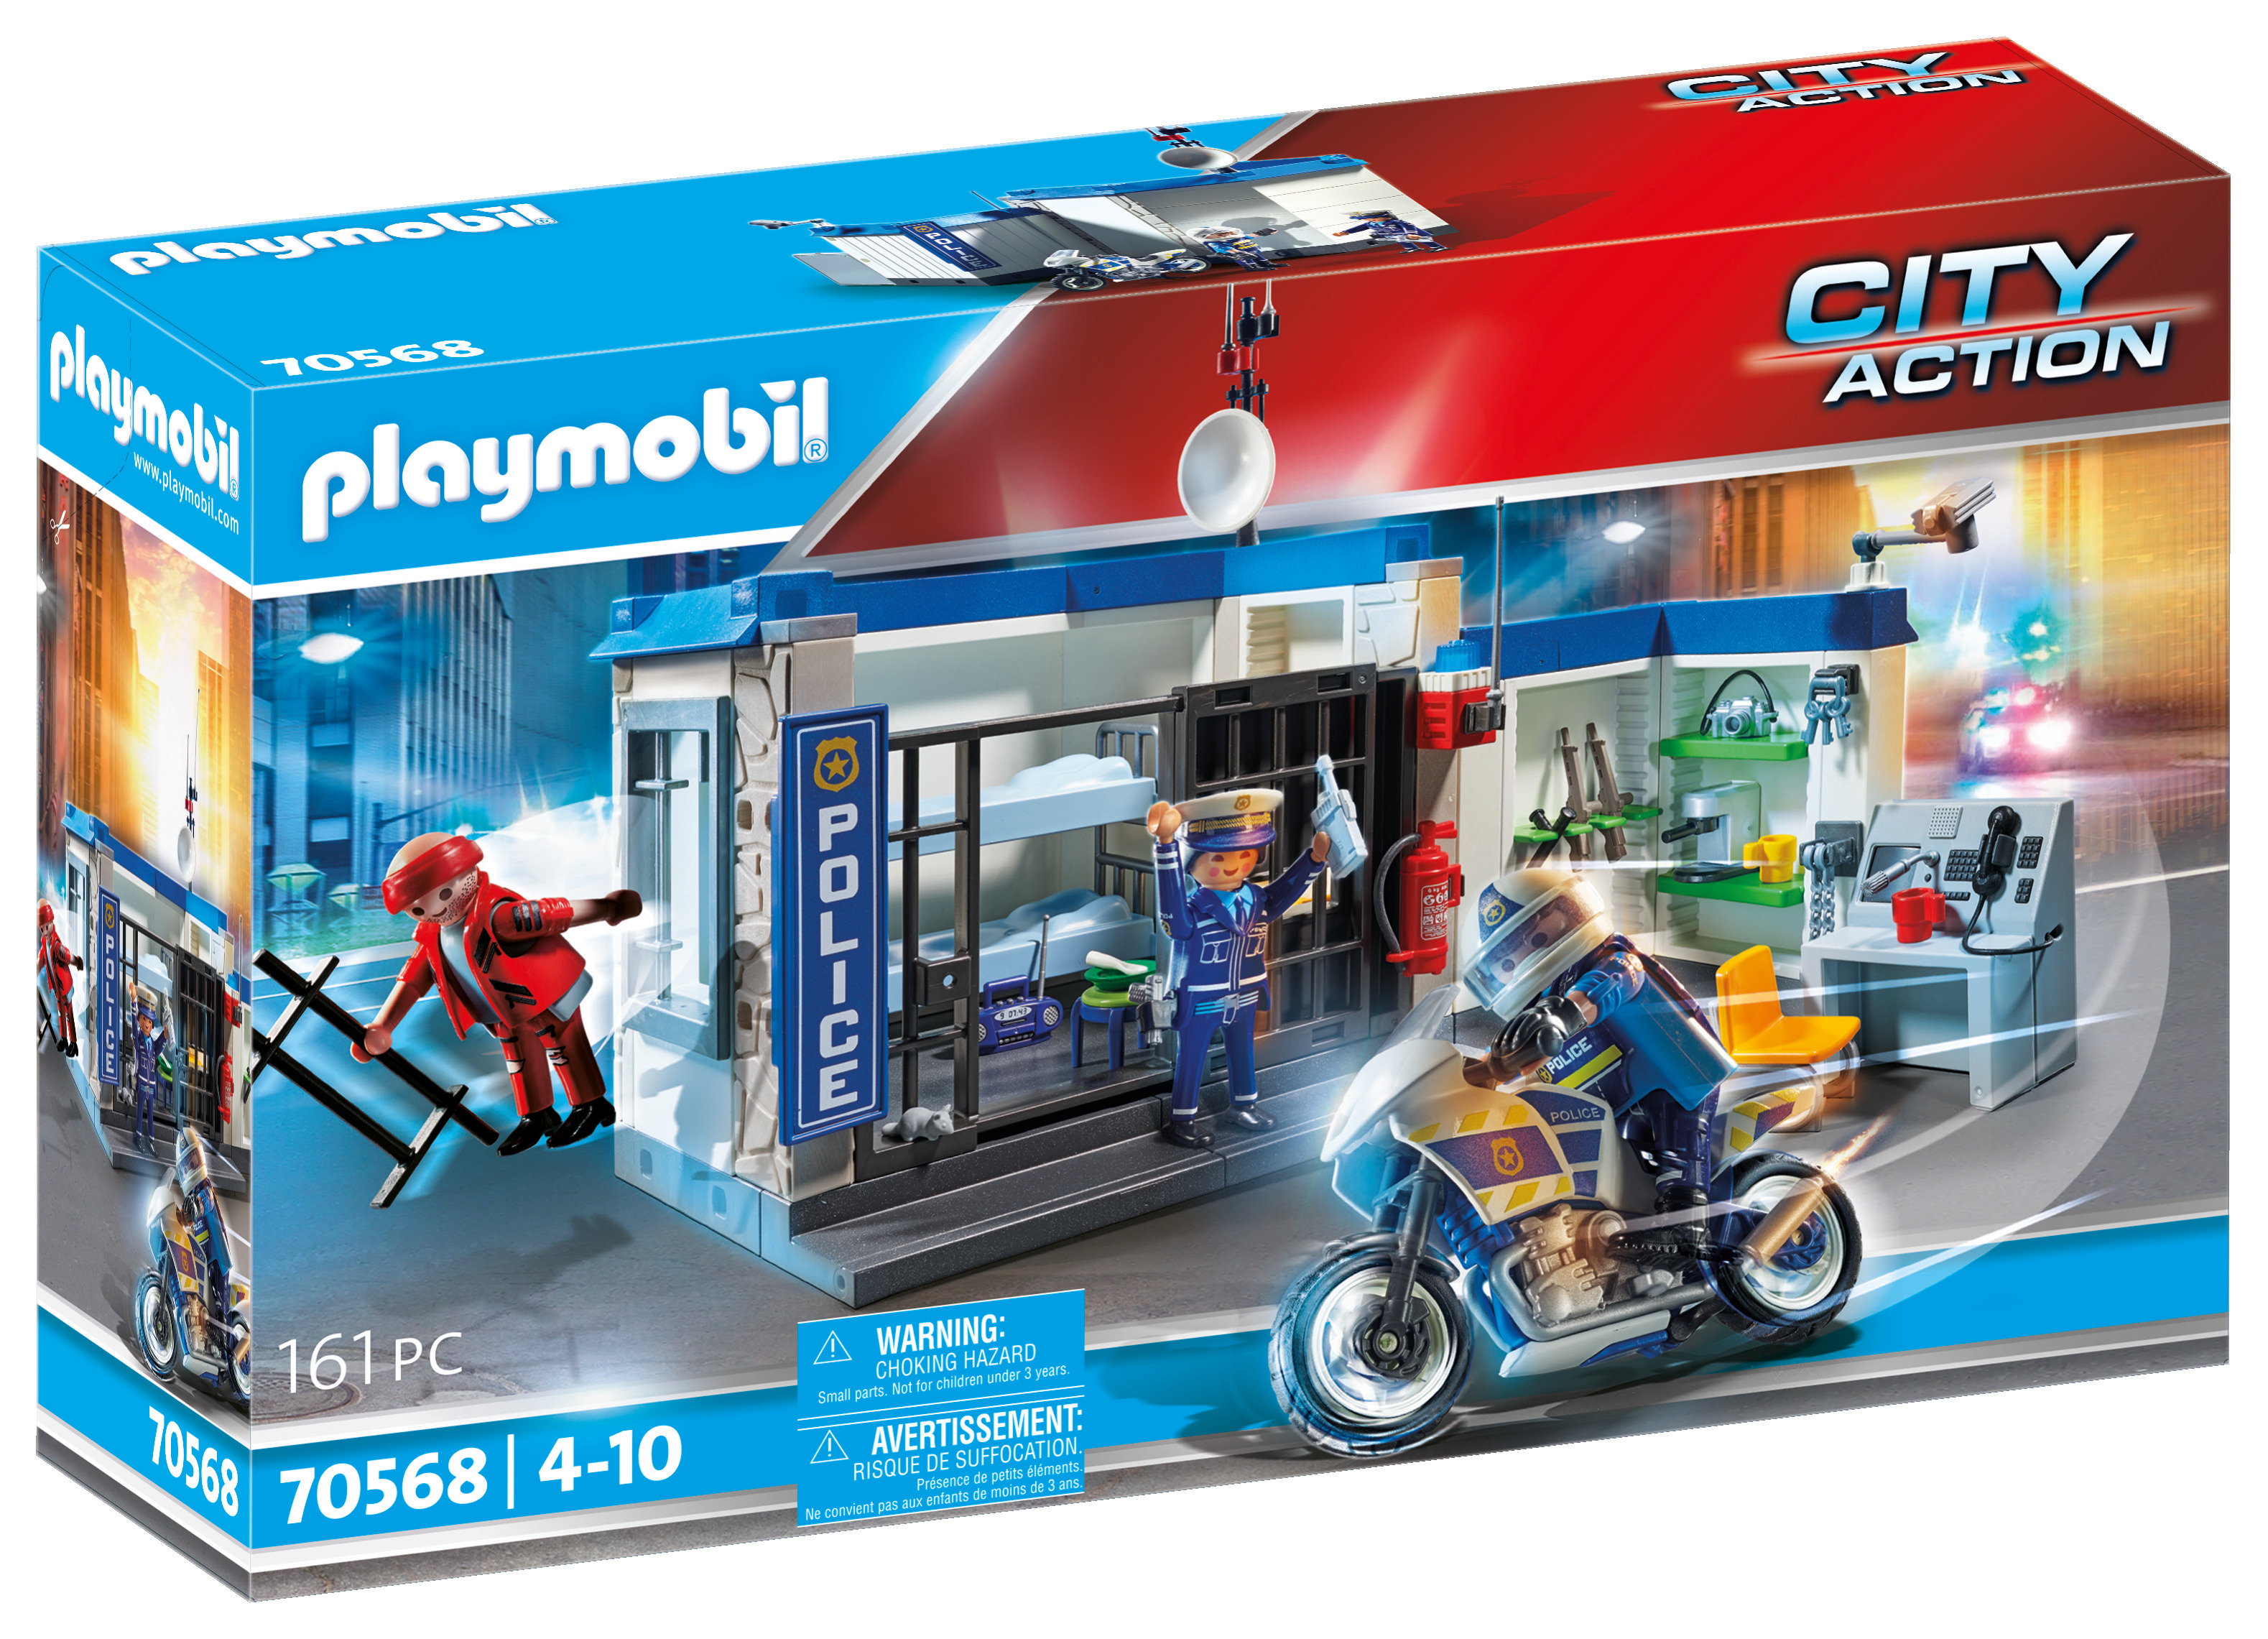 Playmobil Playmobil 70568 City Action Politie Ontsnapping